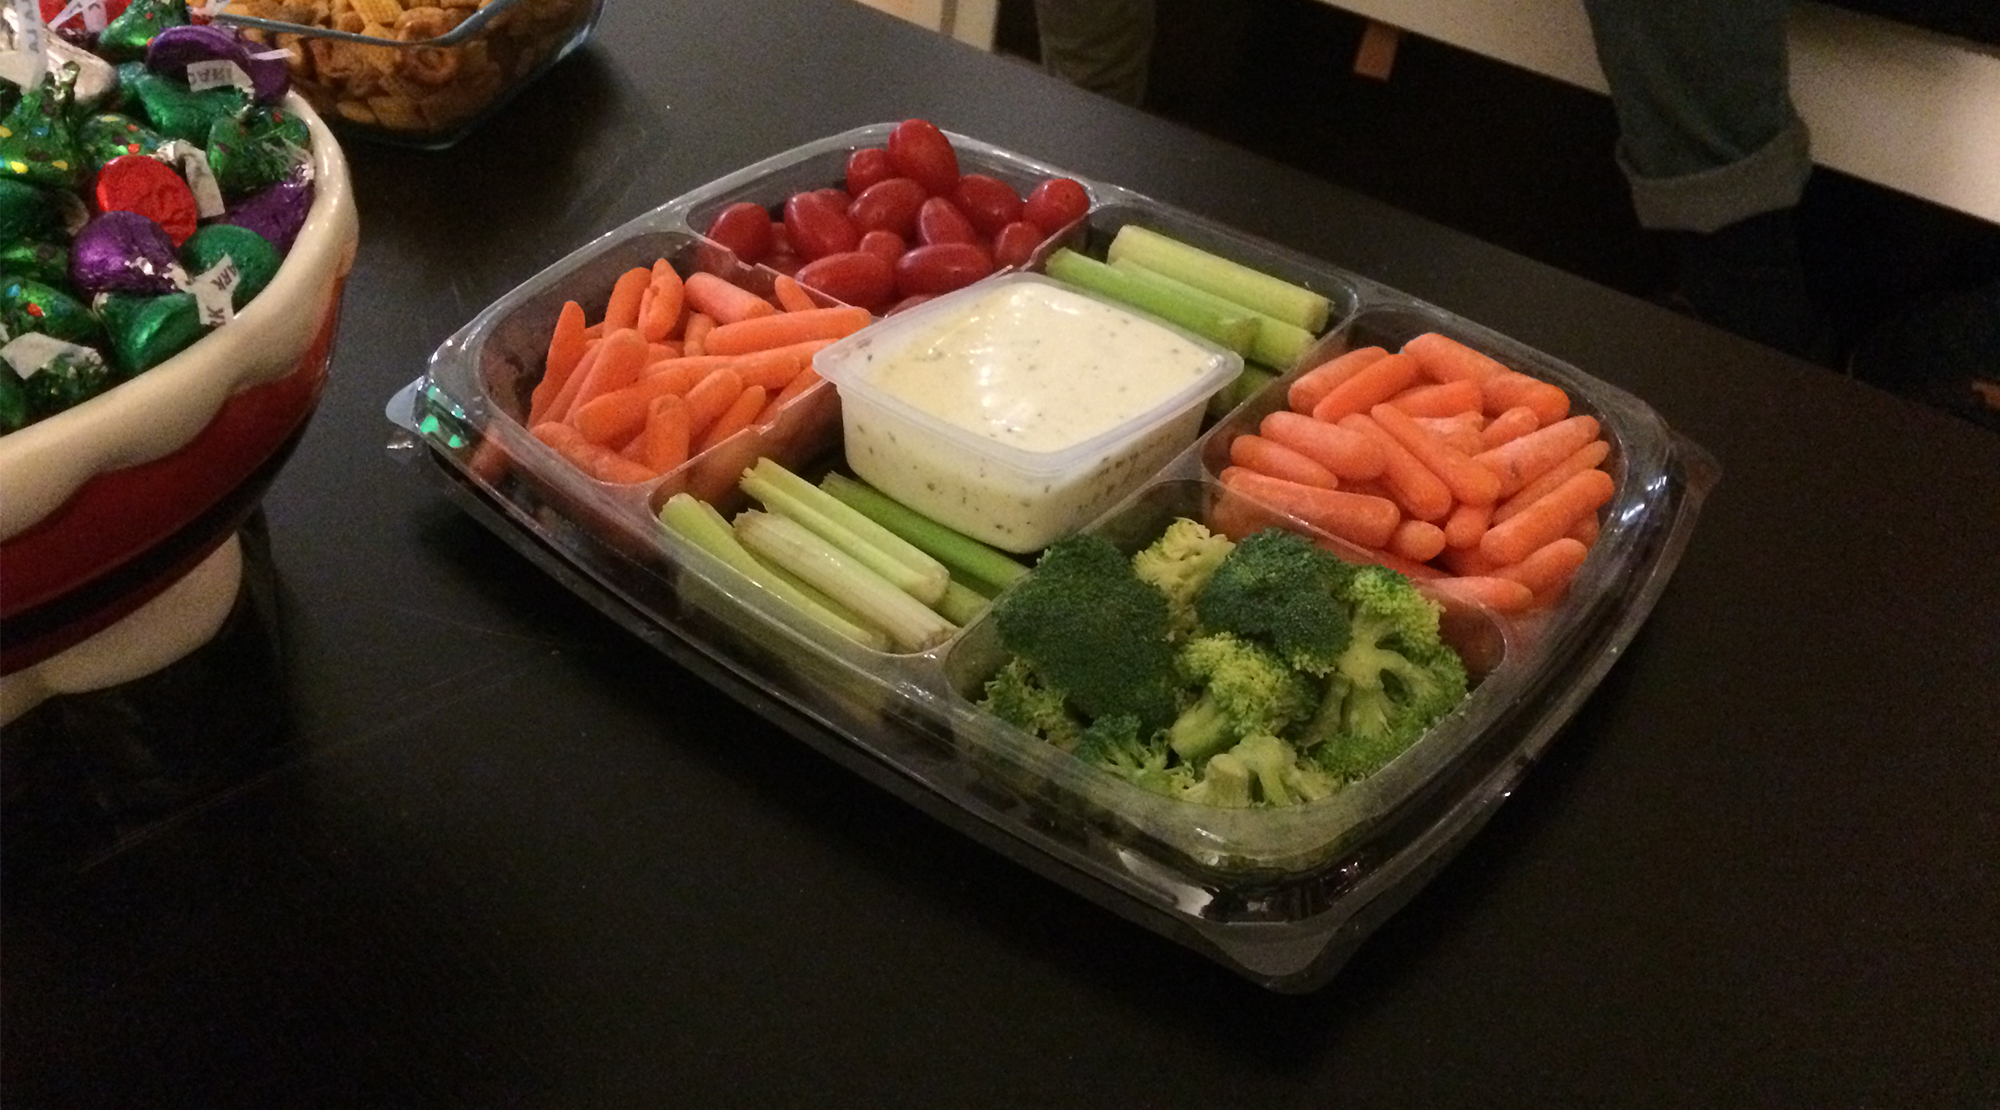 Veggie Platter At Super Bowl Party Left Untouched The Sack Of Troy